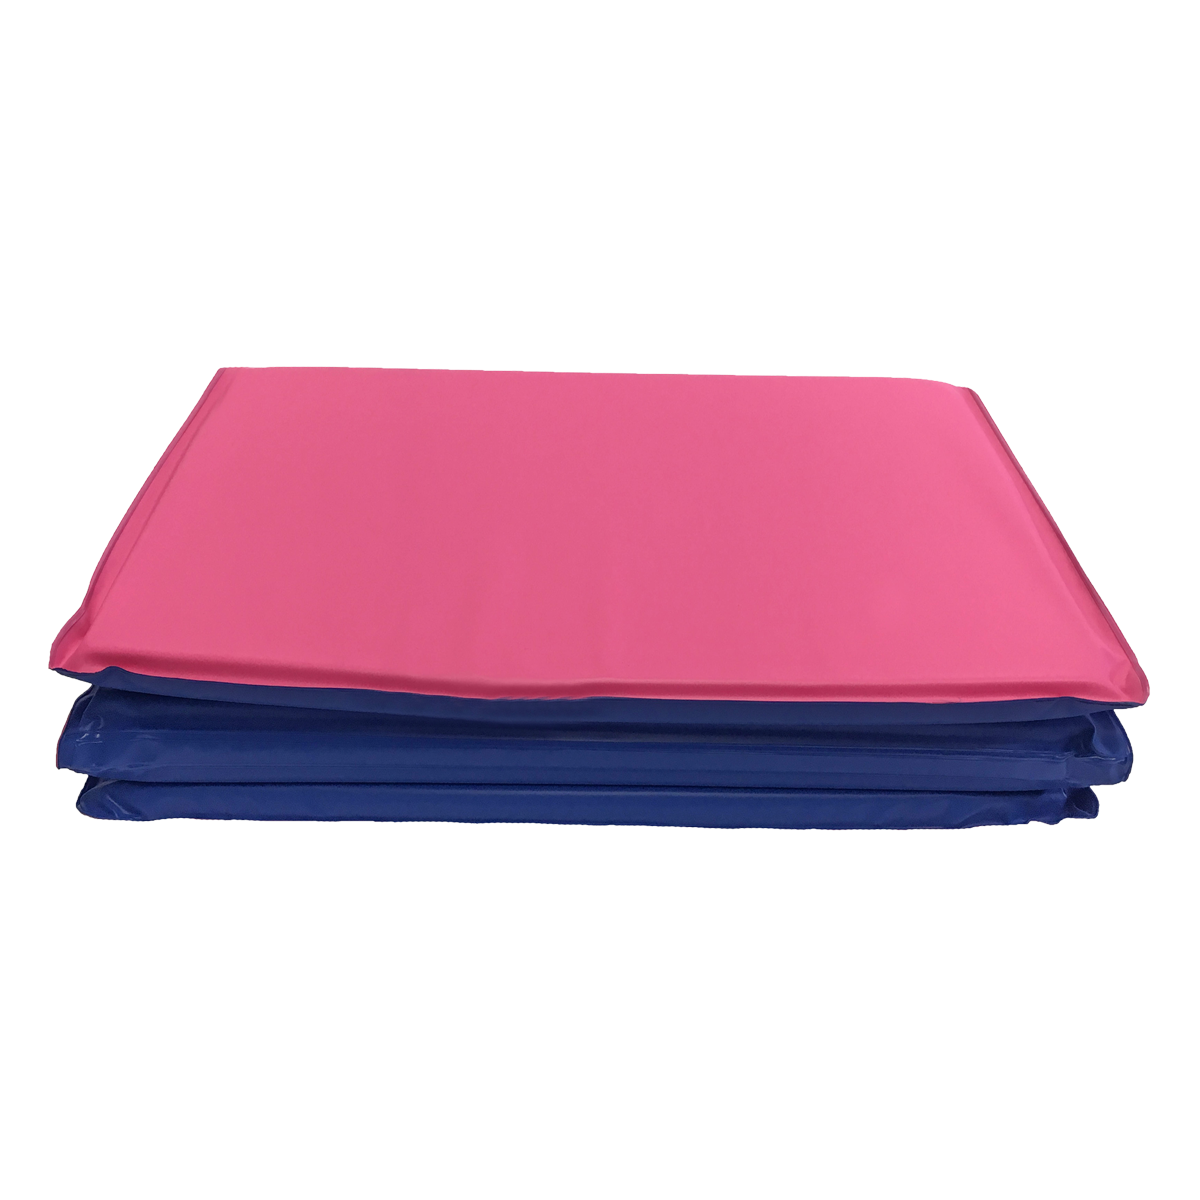 3/4" TODDLER KINDERMAT - PINK/BLUE WITH PILLOW